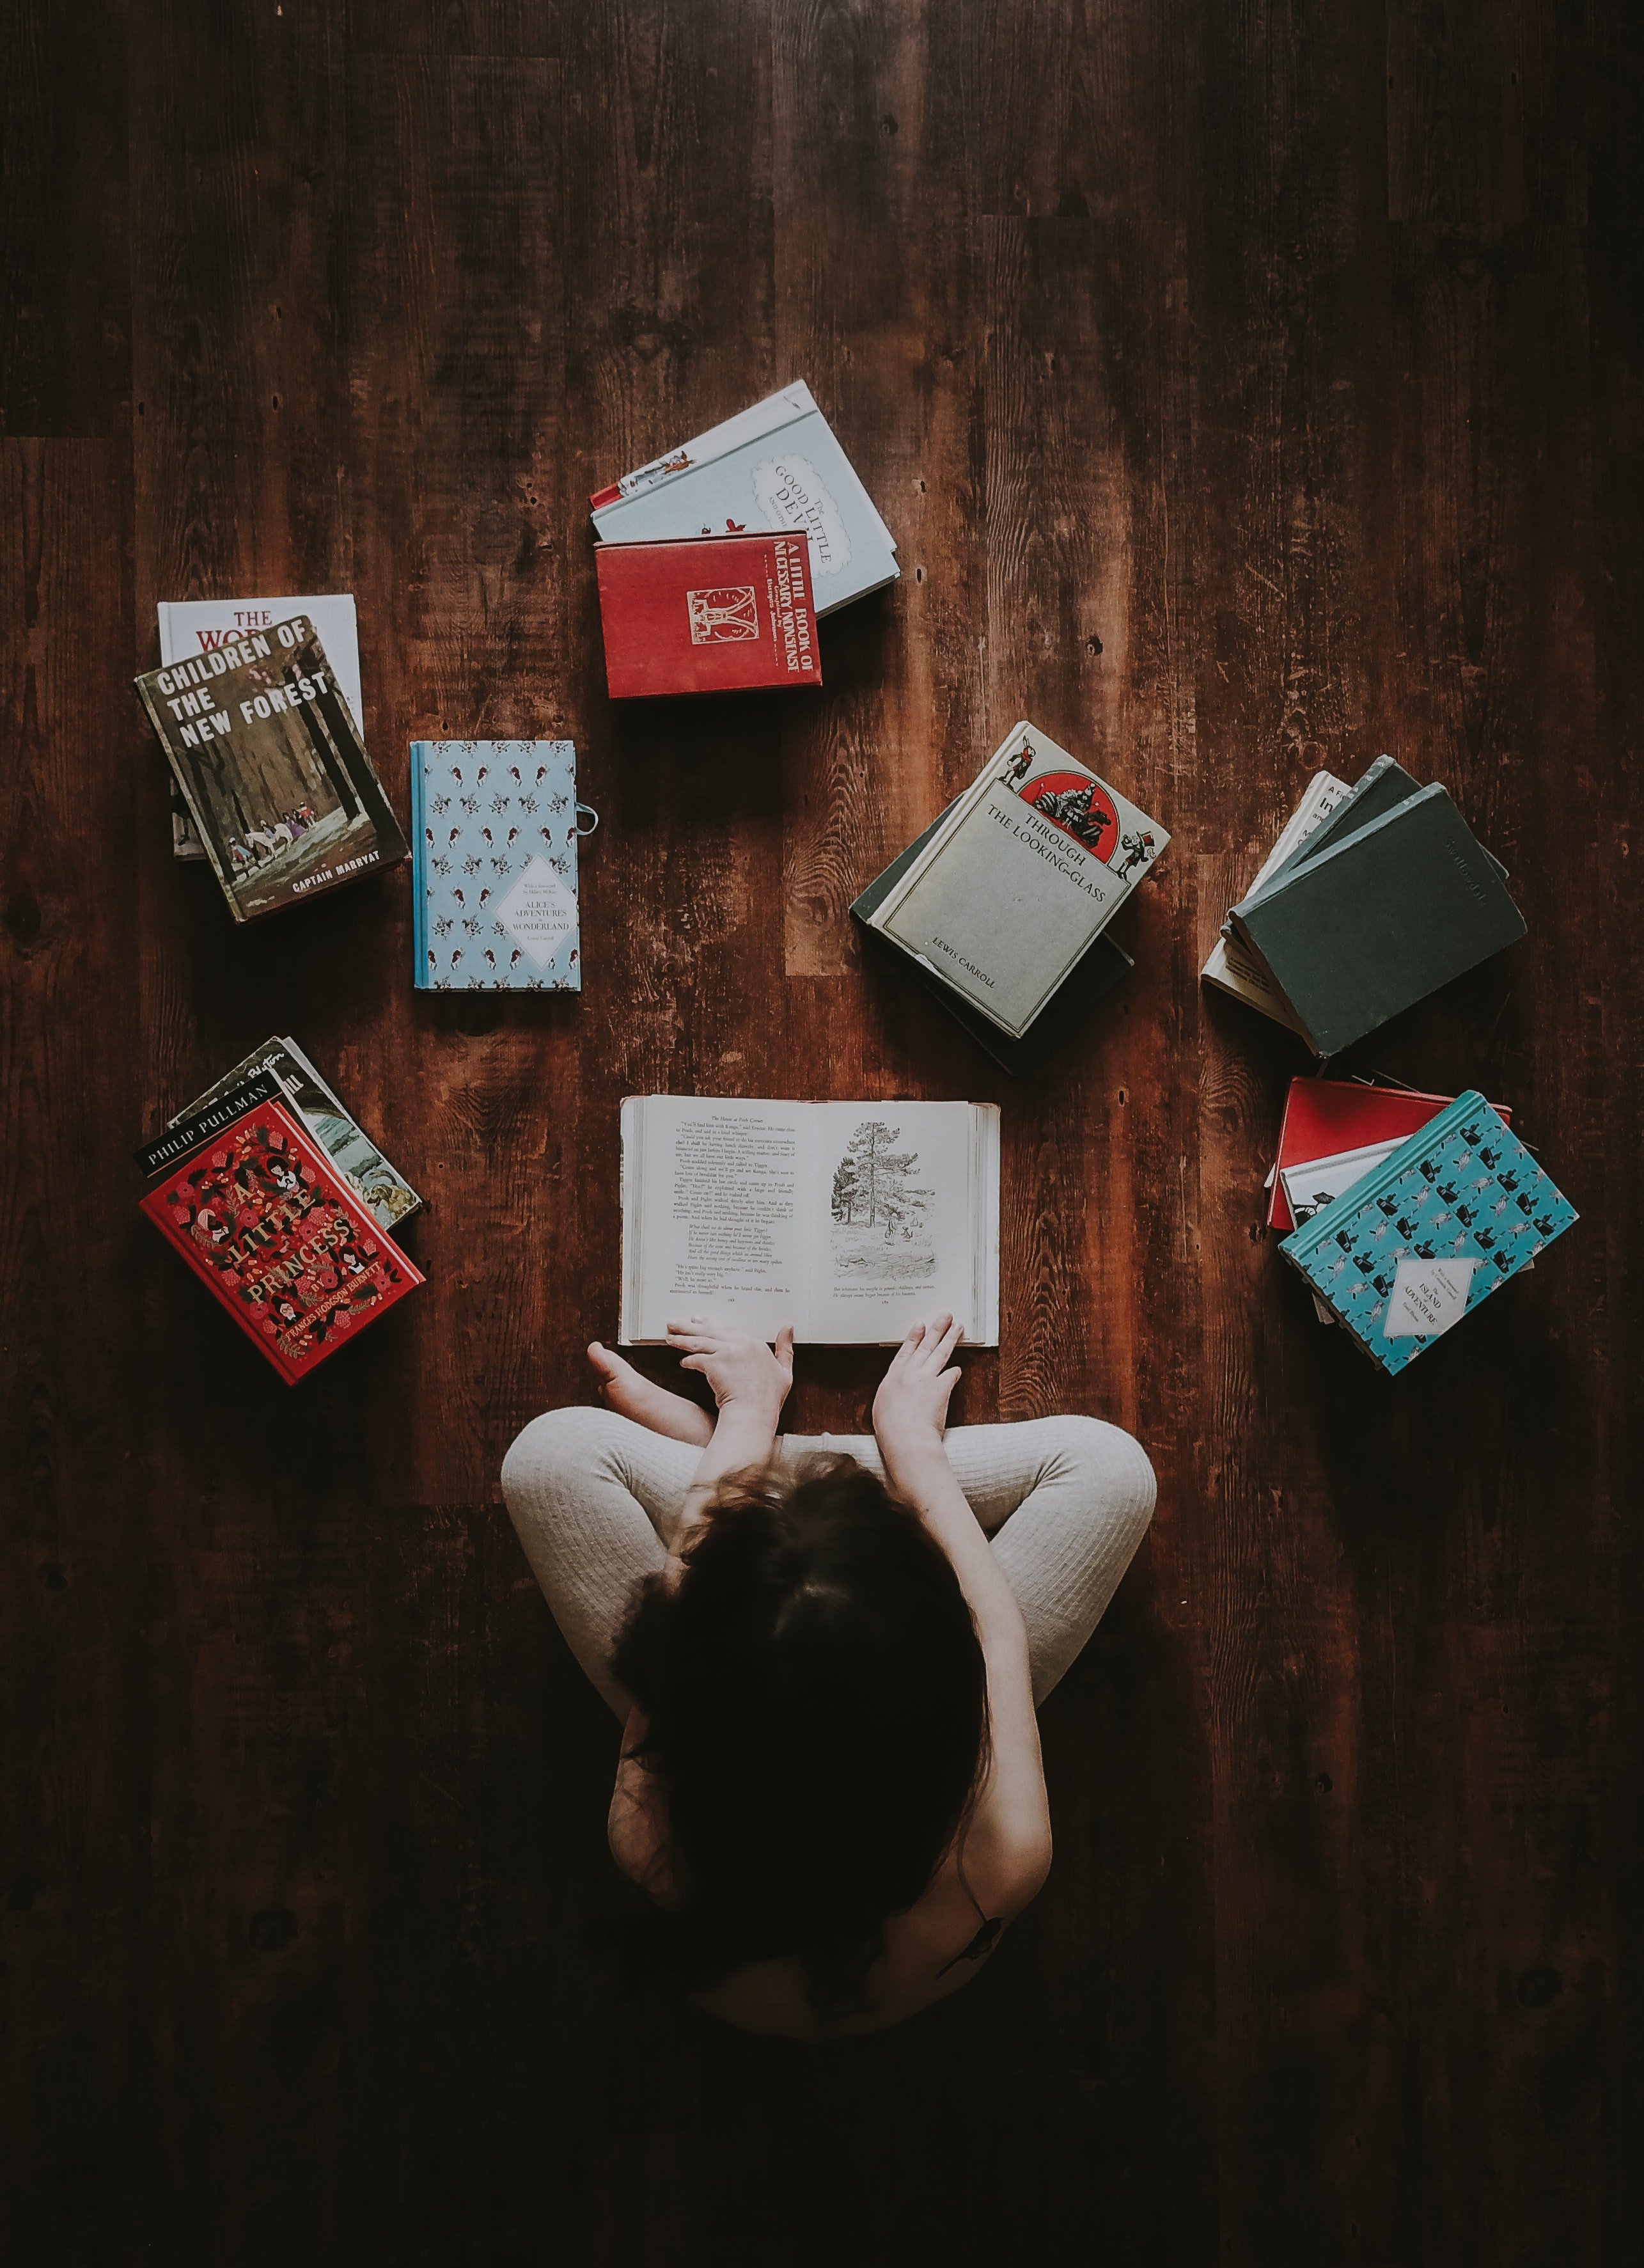 Boy sitting on the floor with books | Source: Unsplash